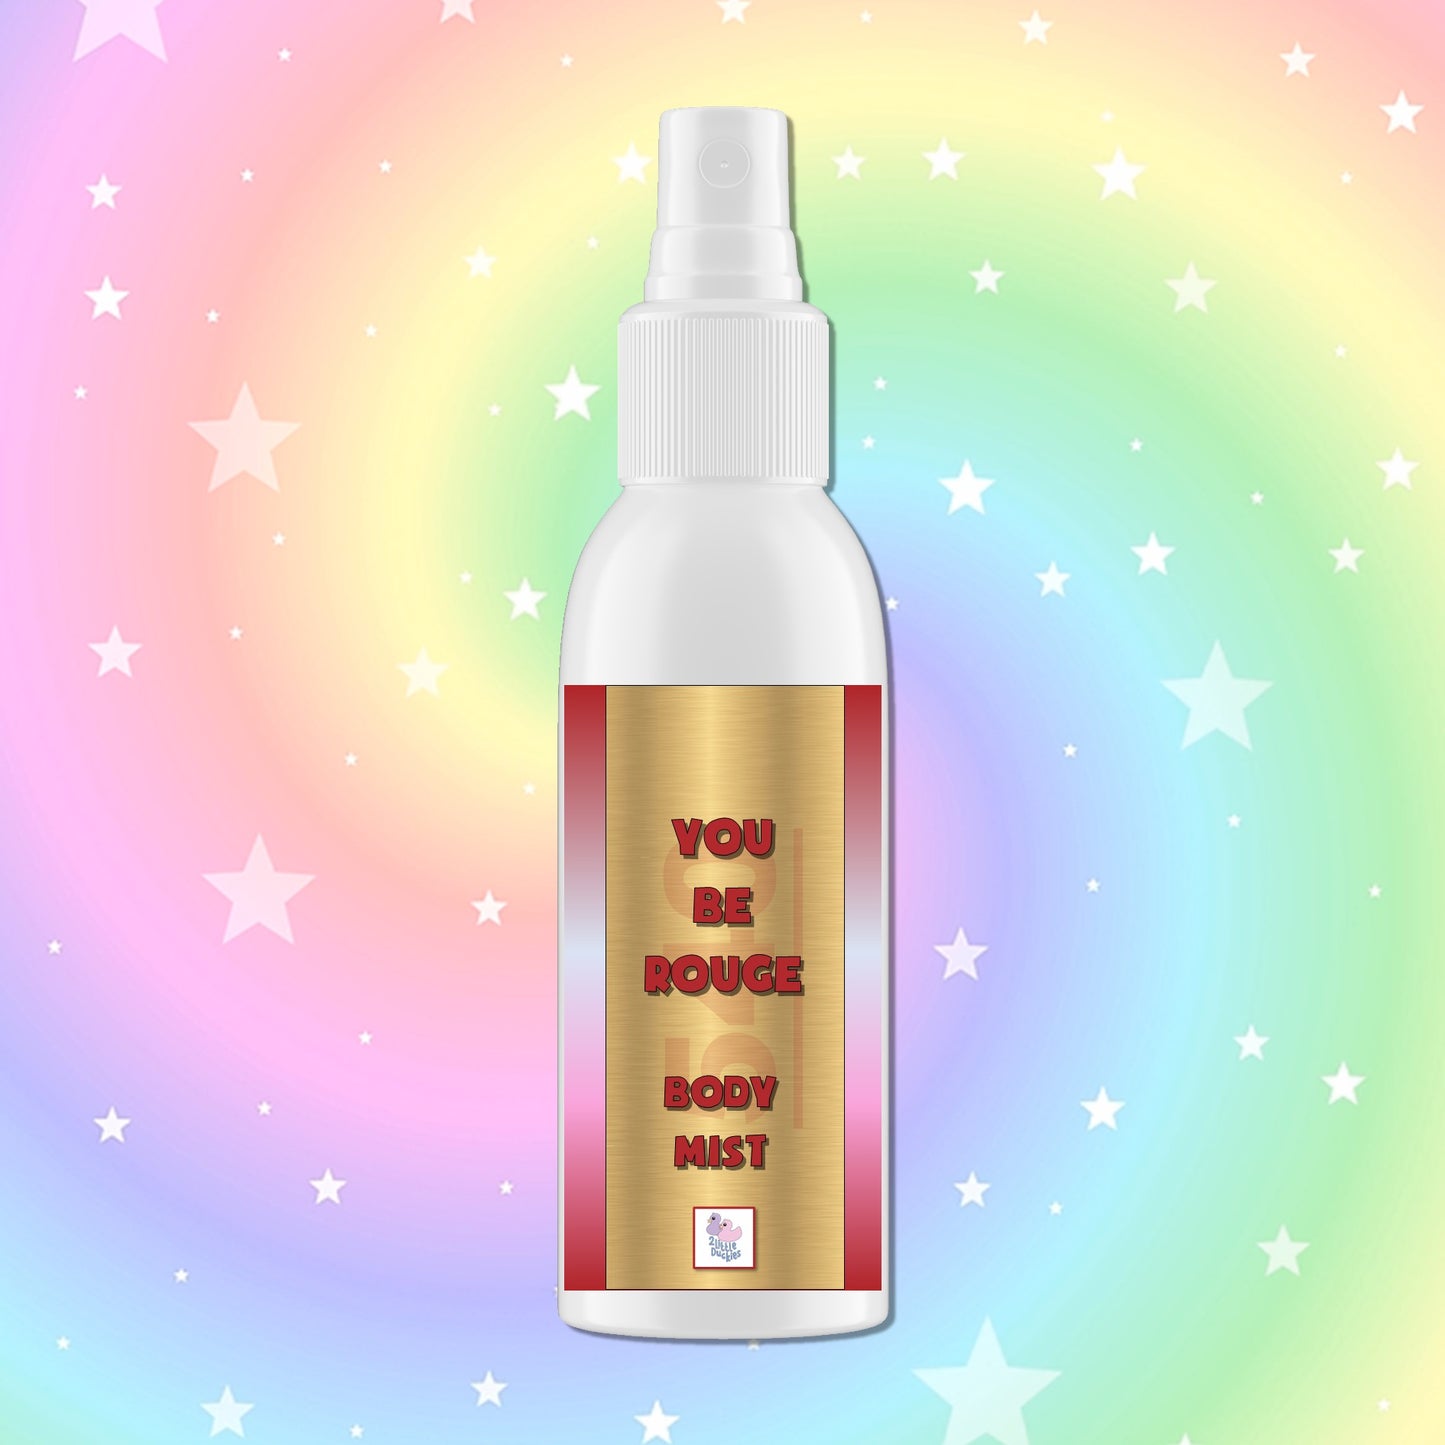 You Be Rouge Body Mist 150ml